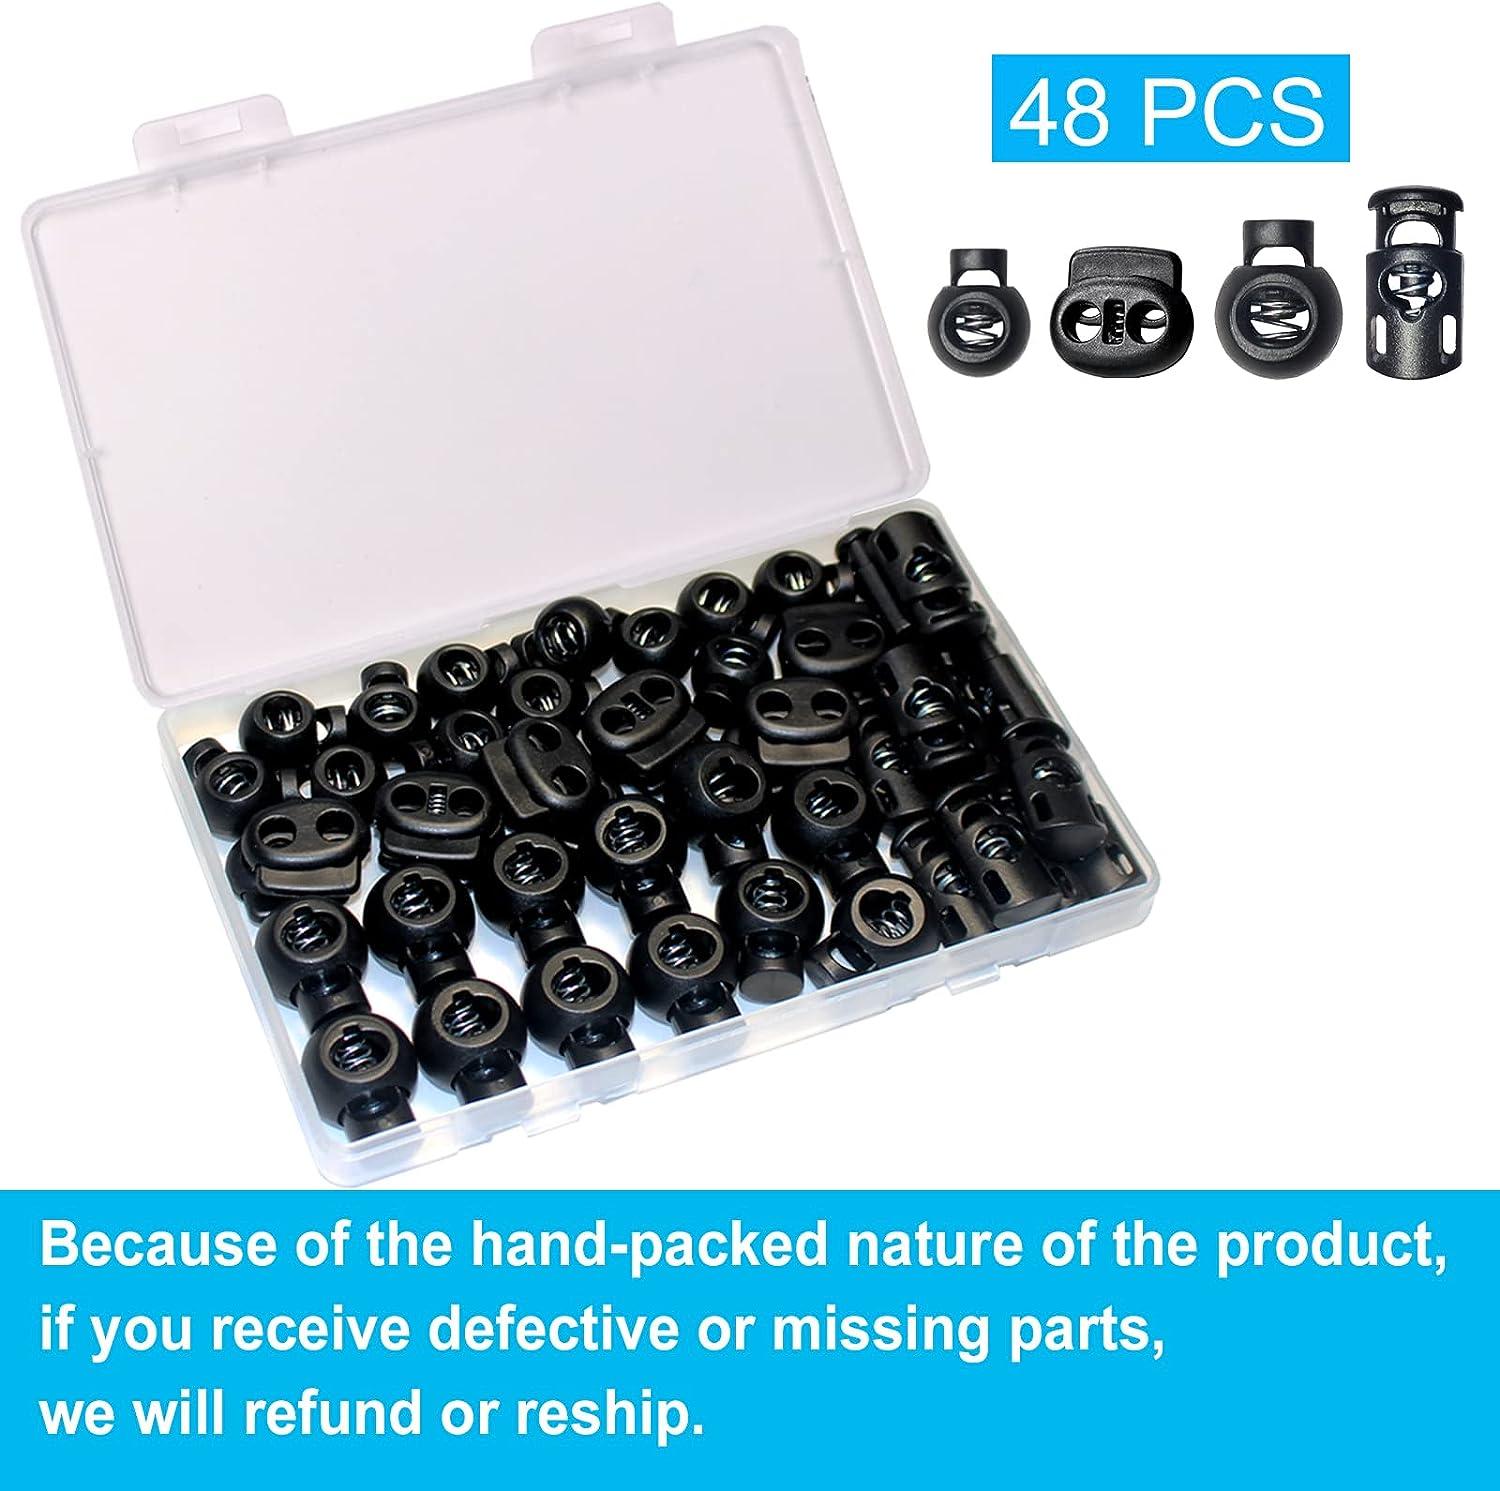  ZUSHALLMY 48pcs Upgraded Plastic Cord Lock, Cord Locks - Draw  String Clip with Spring Toggle Stoppers Buttons for Drawstrings, Shoelaces,  Paracord : Arts, Crafts & Sewing